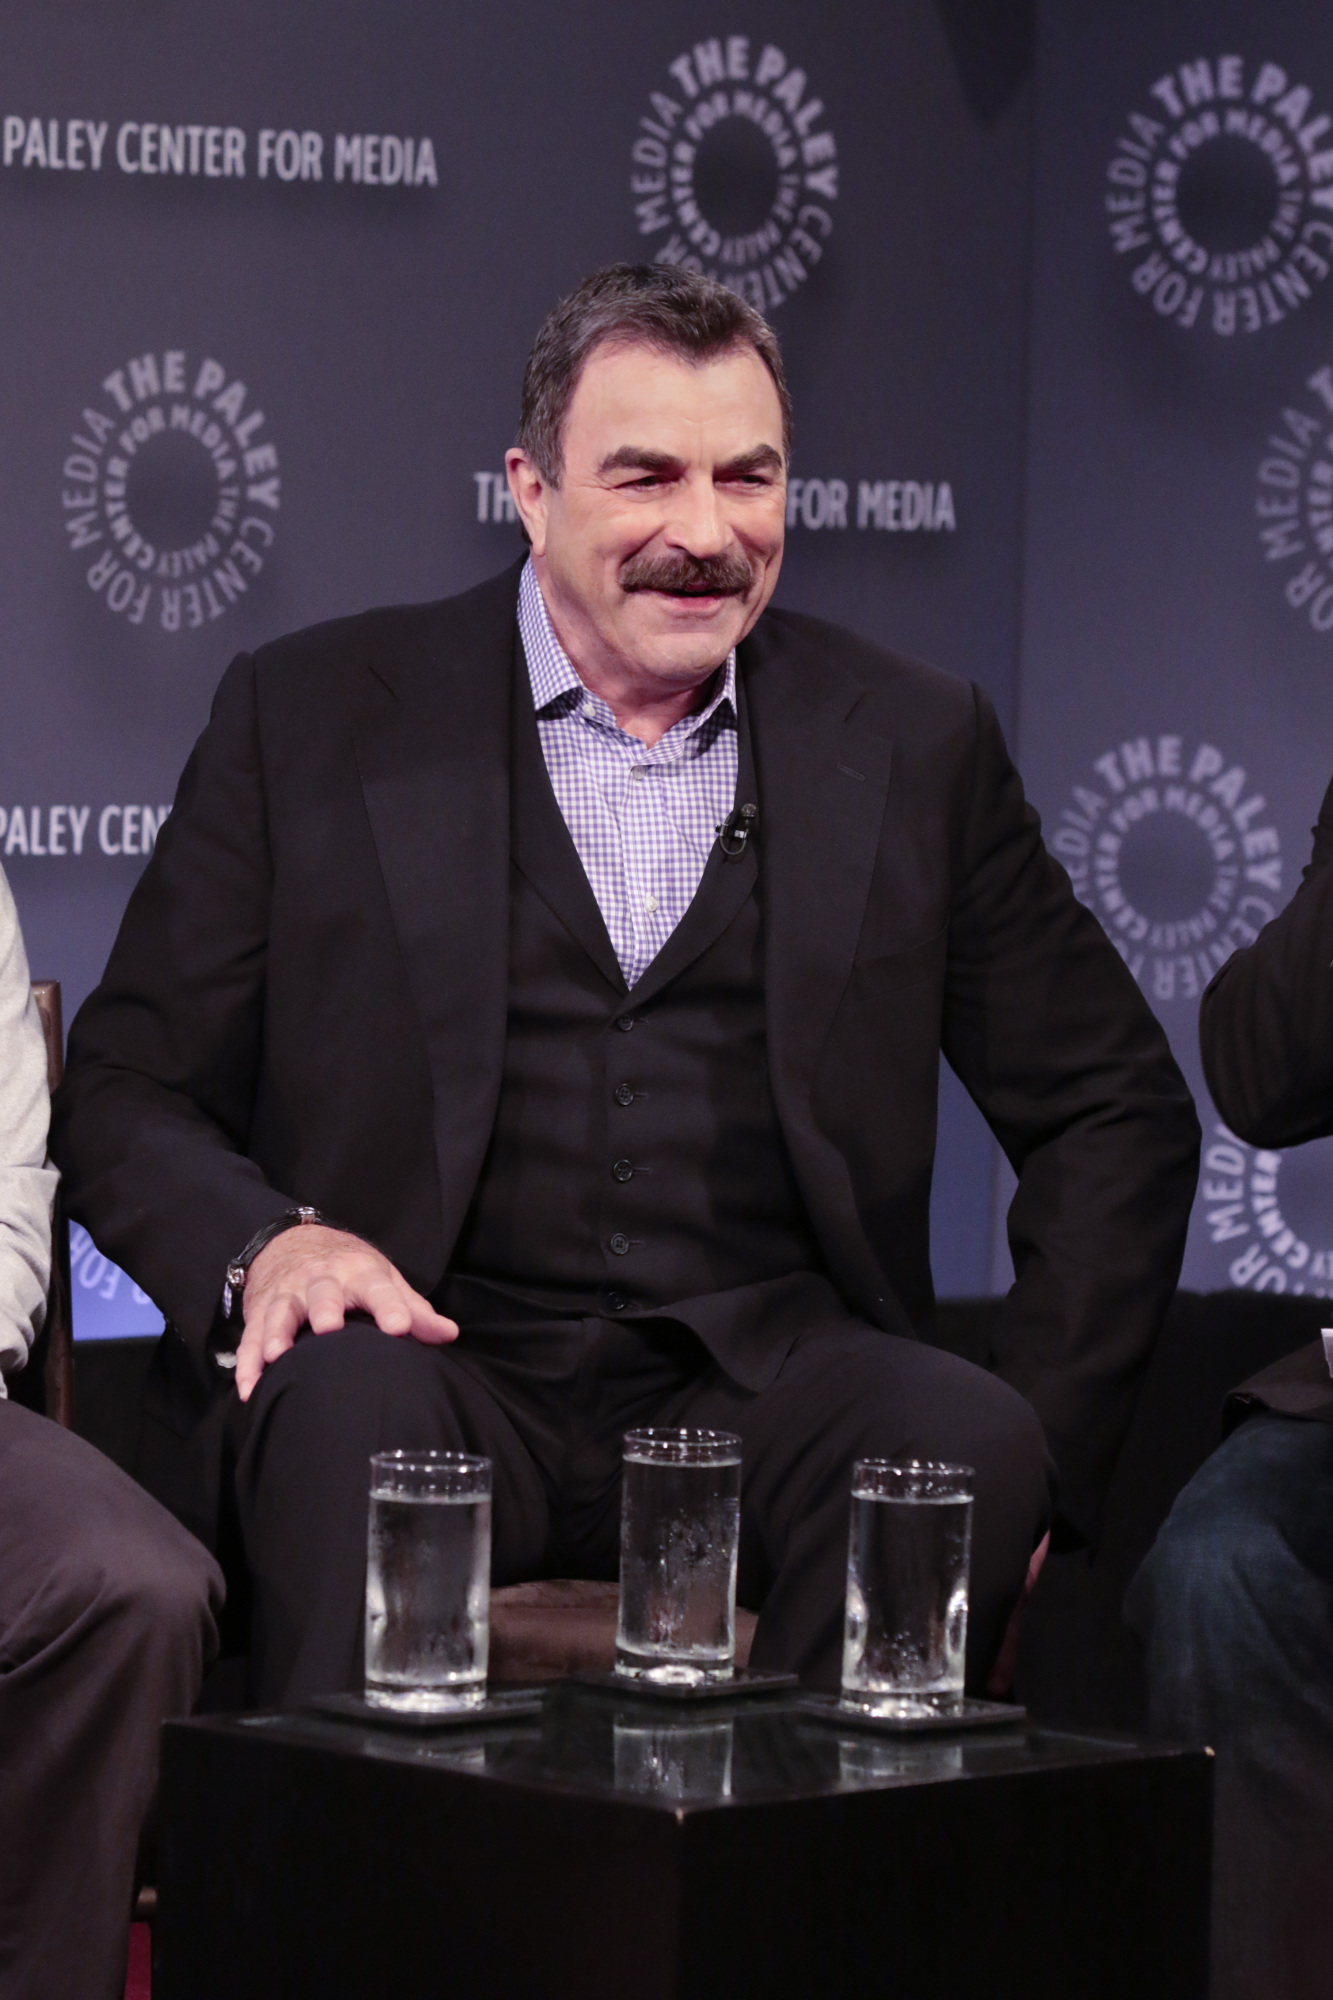 11. Tom Selleck might be drinking three waters.